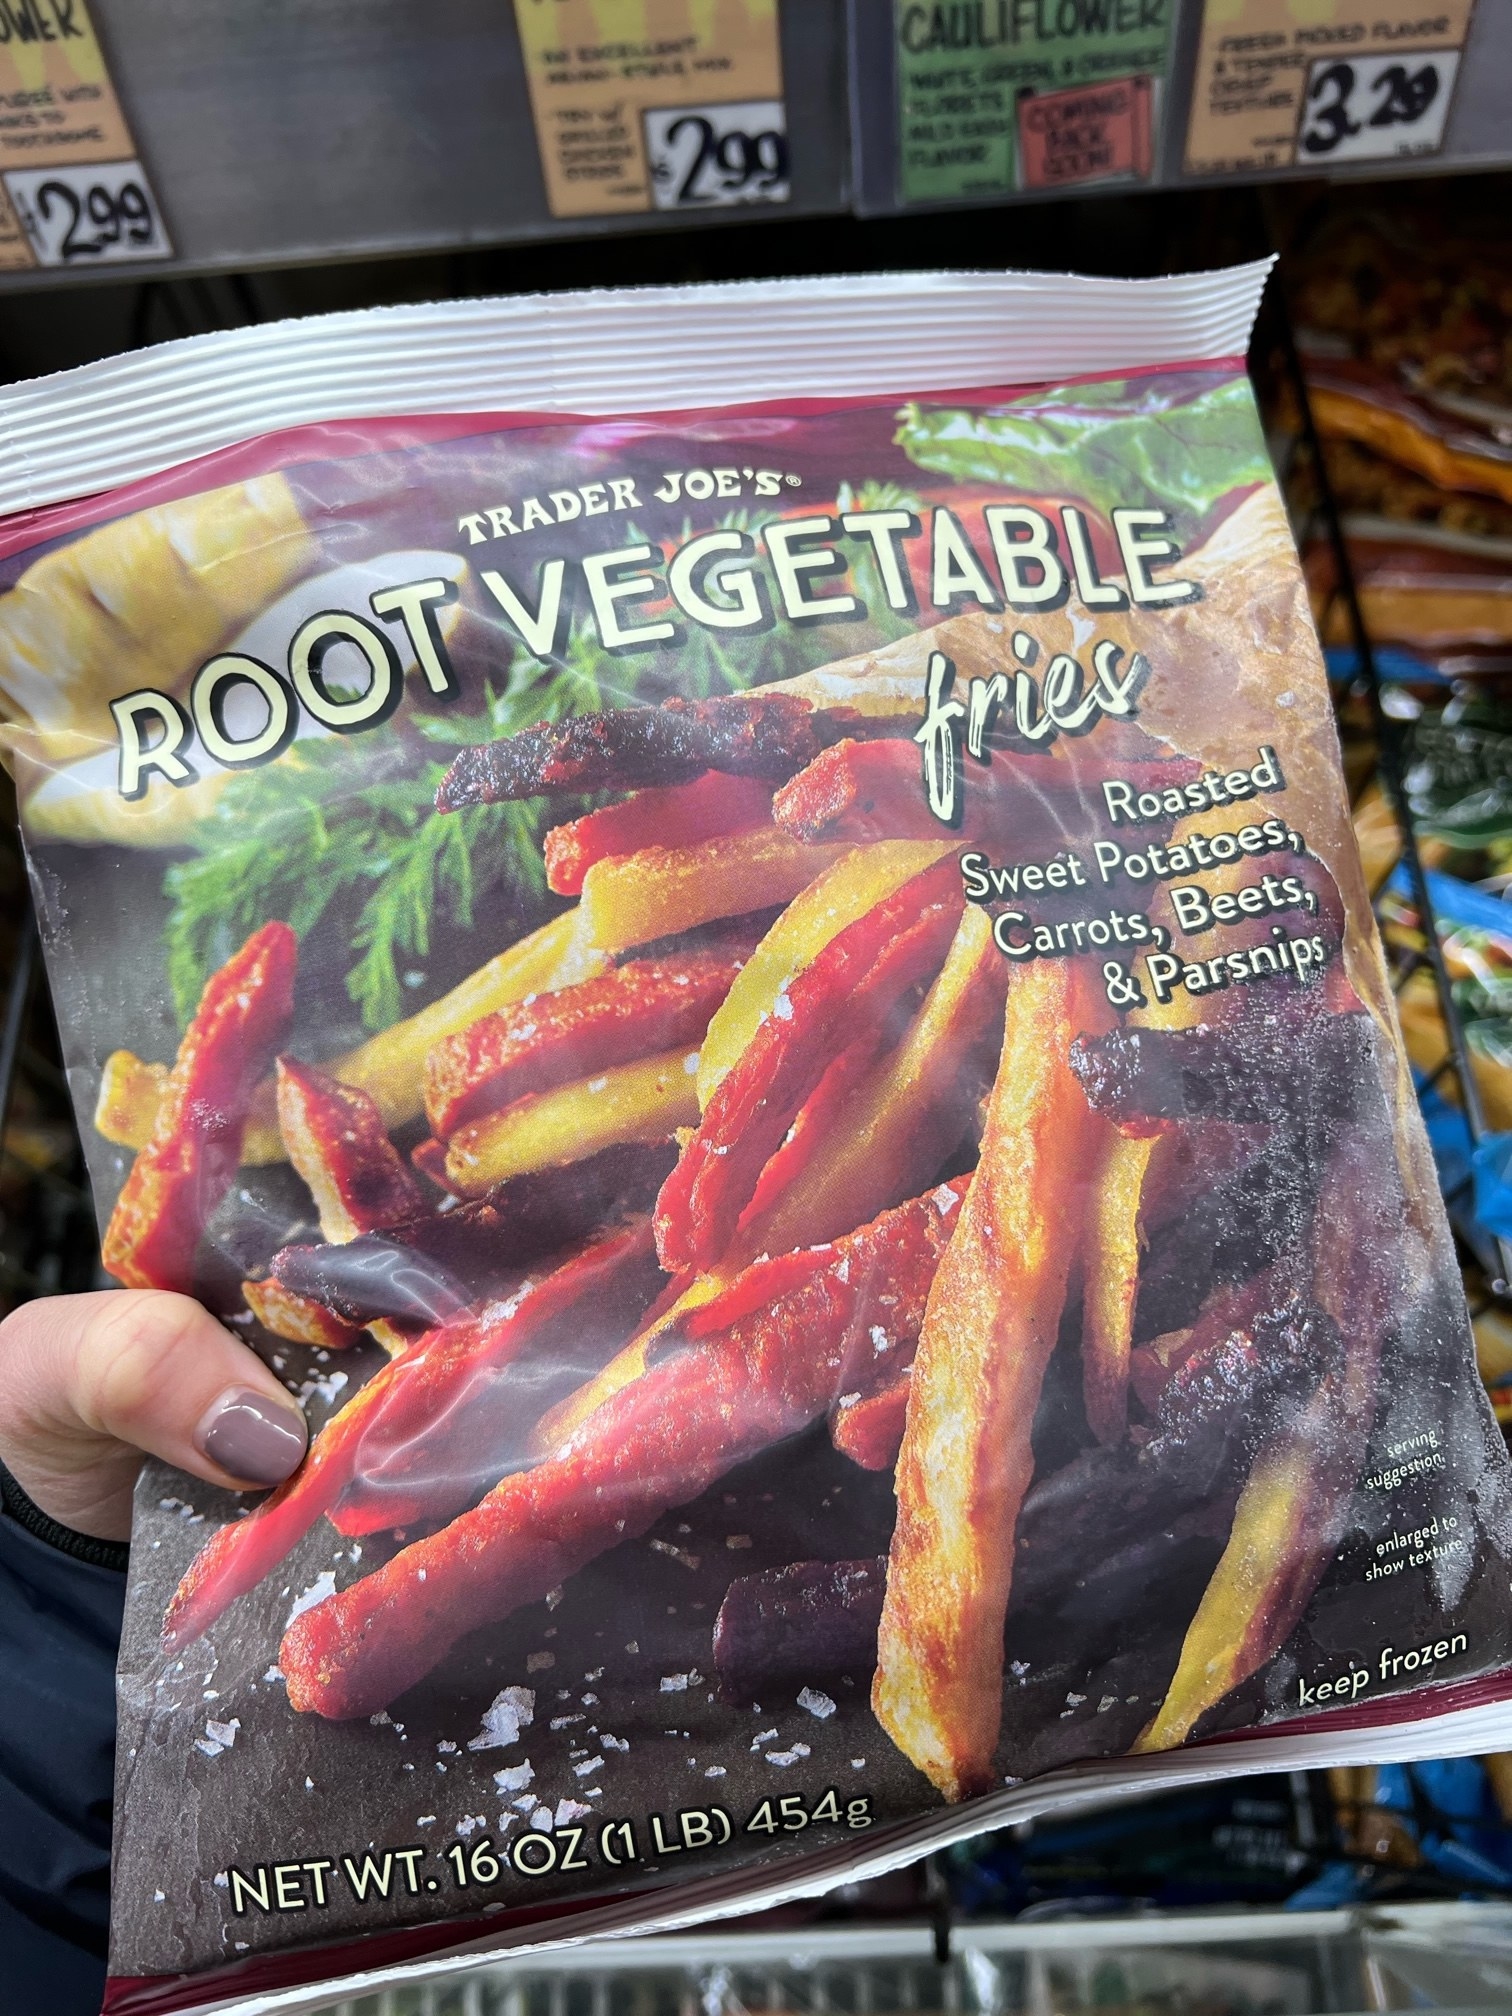 A bag of Root Vegetable Fries